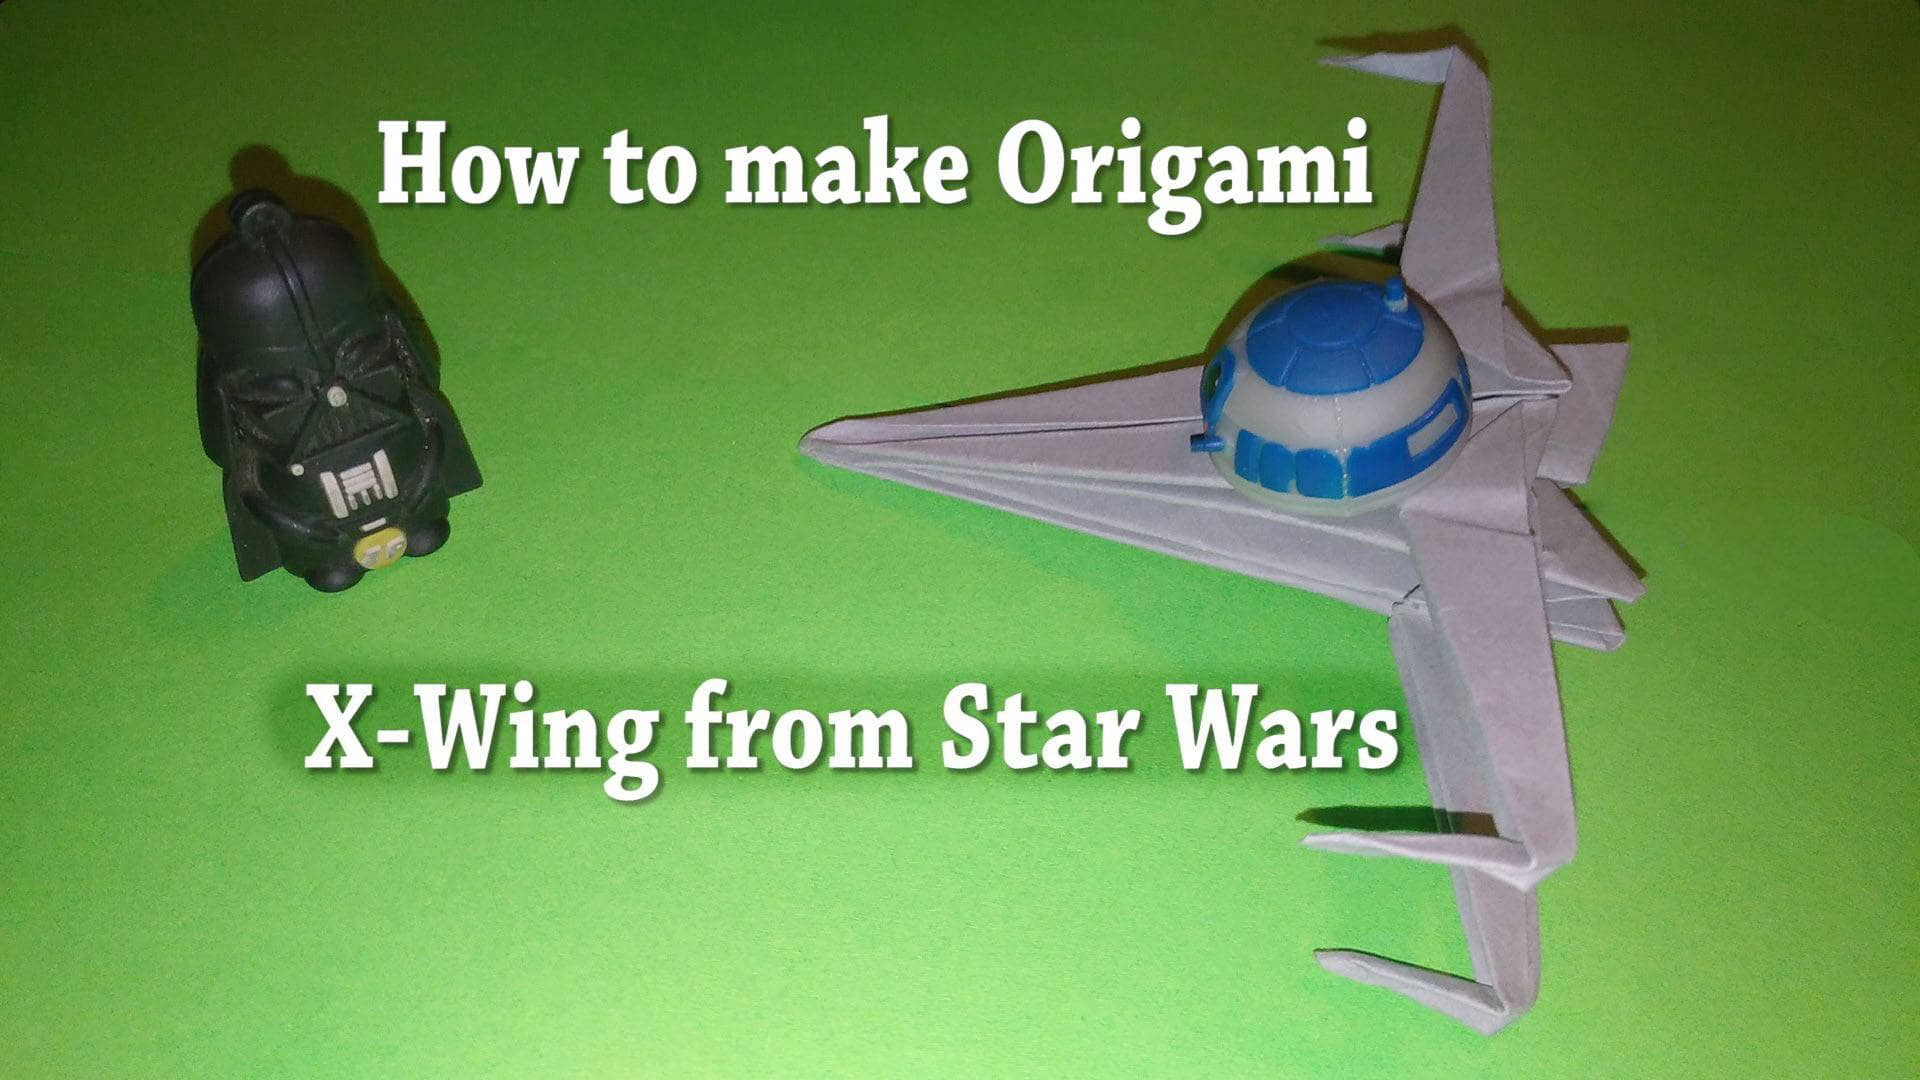 Star Wars X Wing Origami How To Make Origami X Wing From The Star Wars Stem Little Explorers